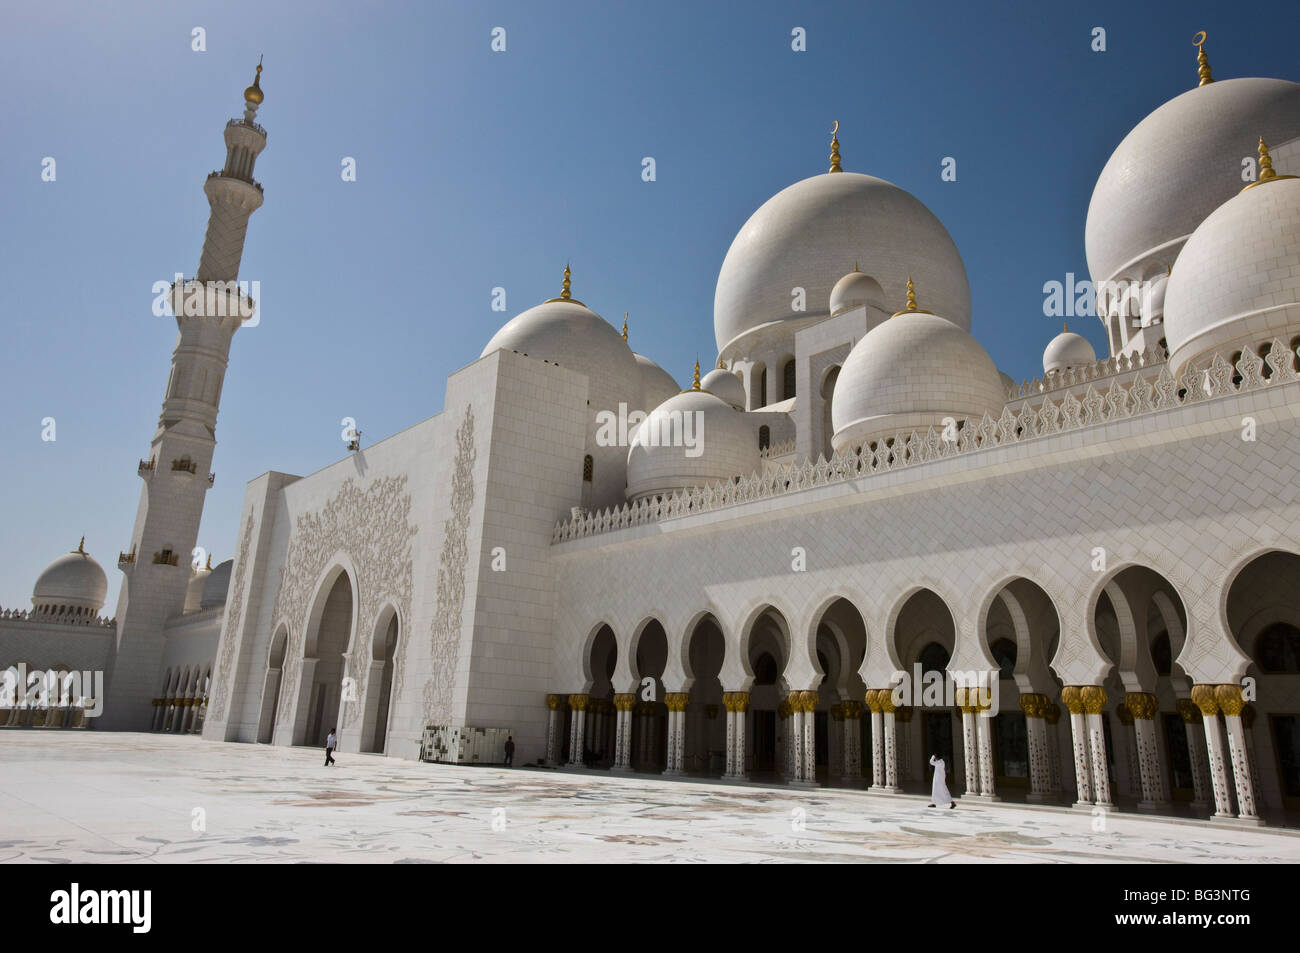 Courtyard, domes and minarets of the new Sheikh Zayed Bin Sultan Al Nahyan Mosque, Grand Mosque, Abu Dhabi, United Arab Emirates Stock Photo